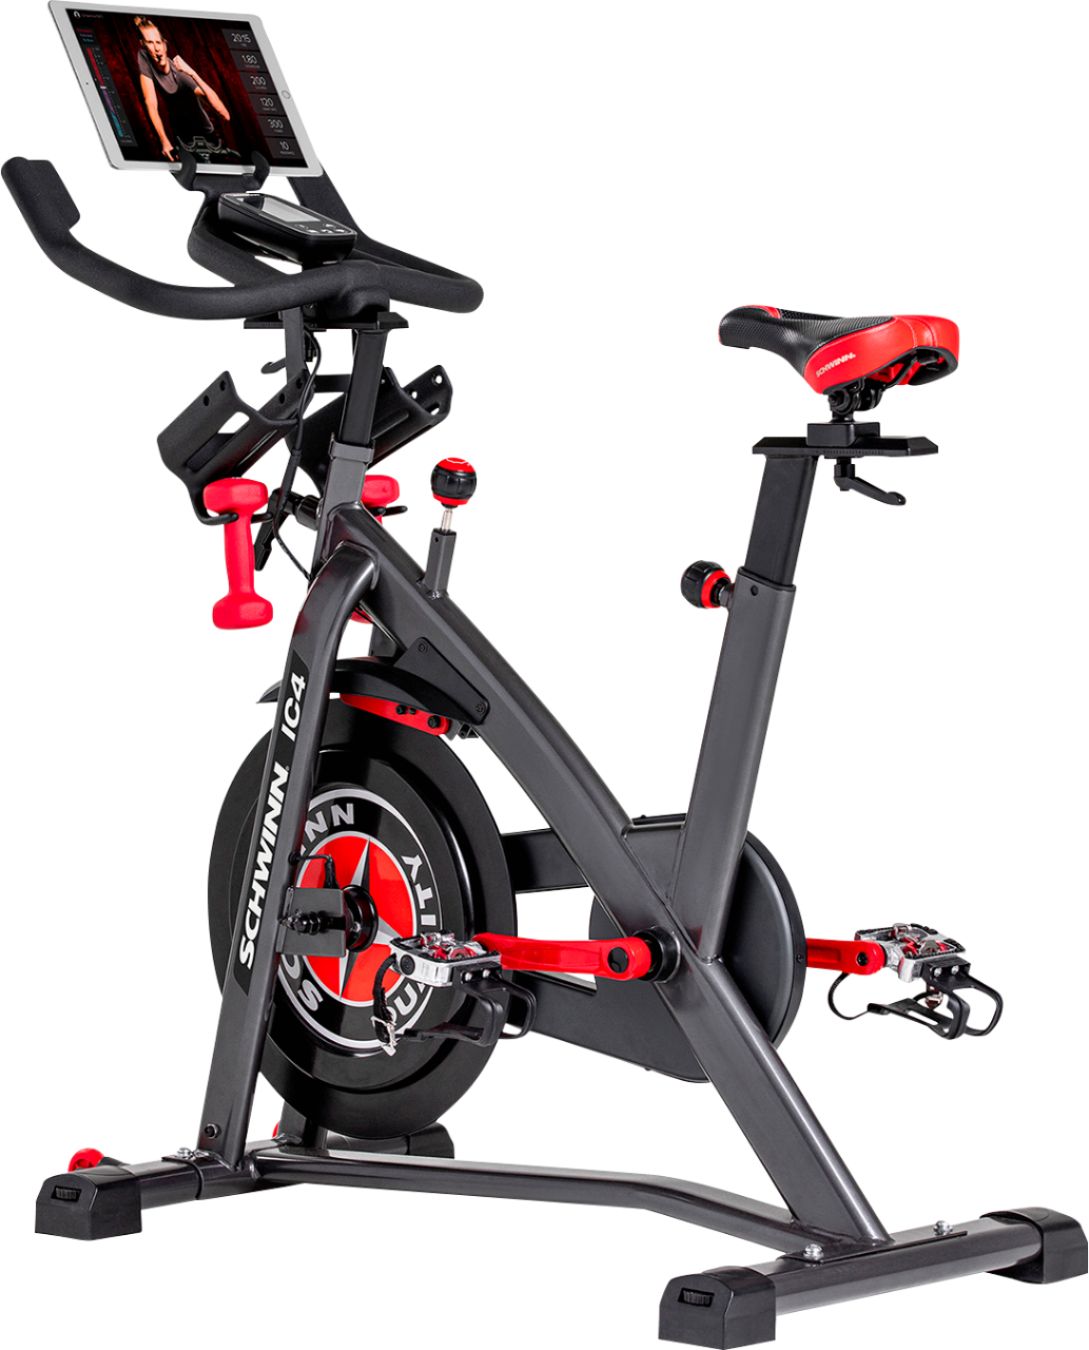 EZ Bike Pro Abdominal Trainer Fitness Cycle Health Core Exercise Energize Flow 